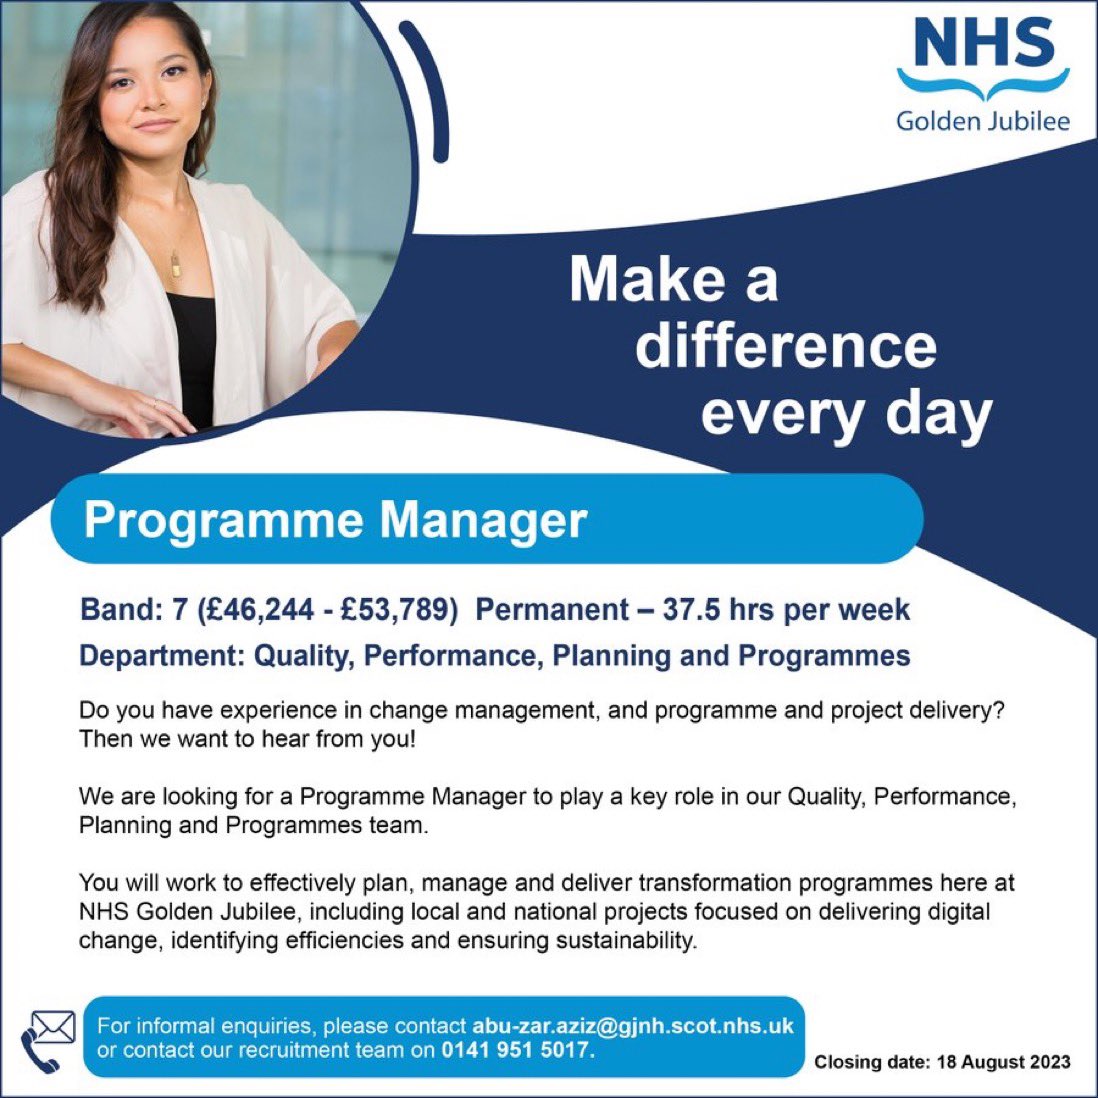 2 days left to apply for our PM vacancy. All the info below 👇 #nhsjobs #programmemanager #recruitment